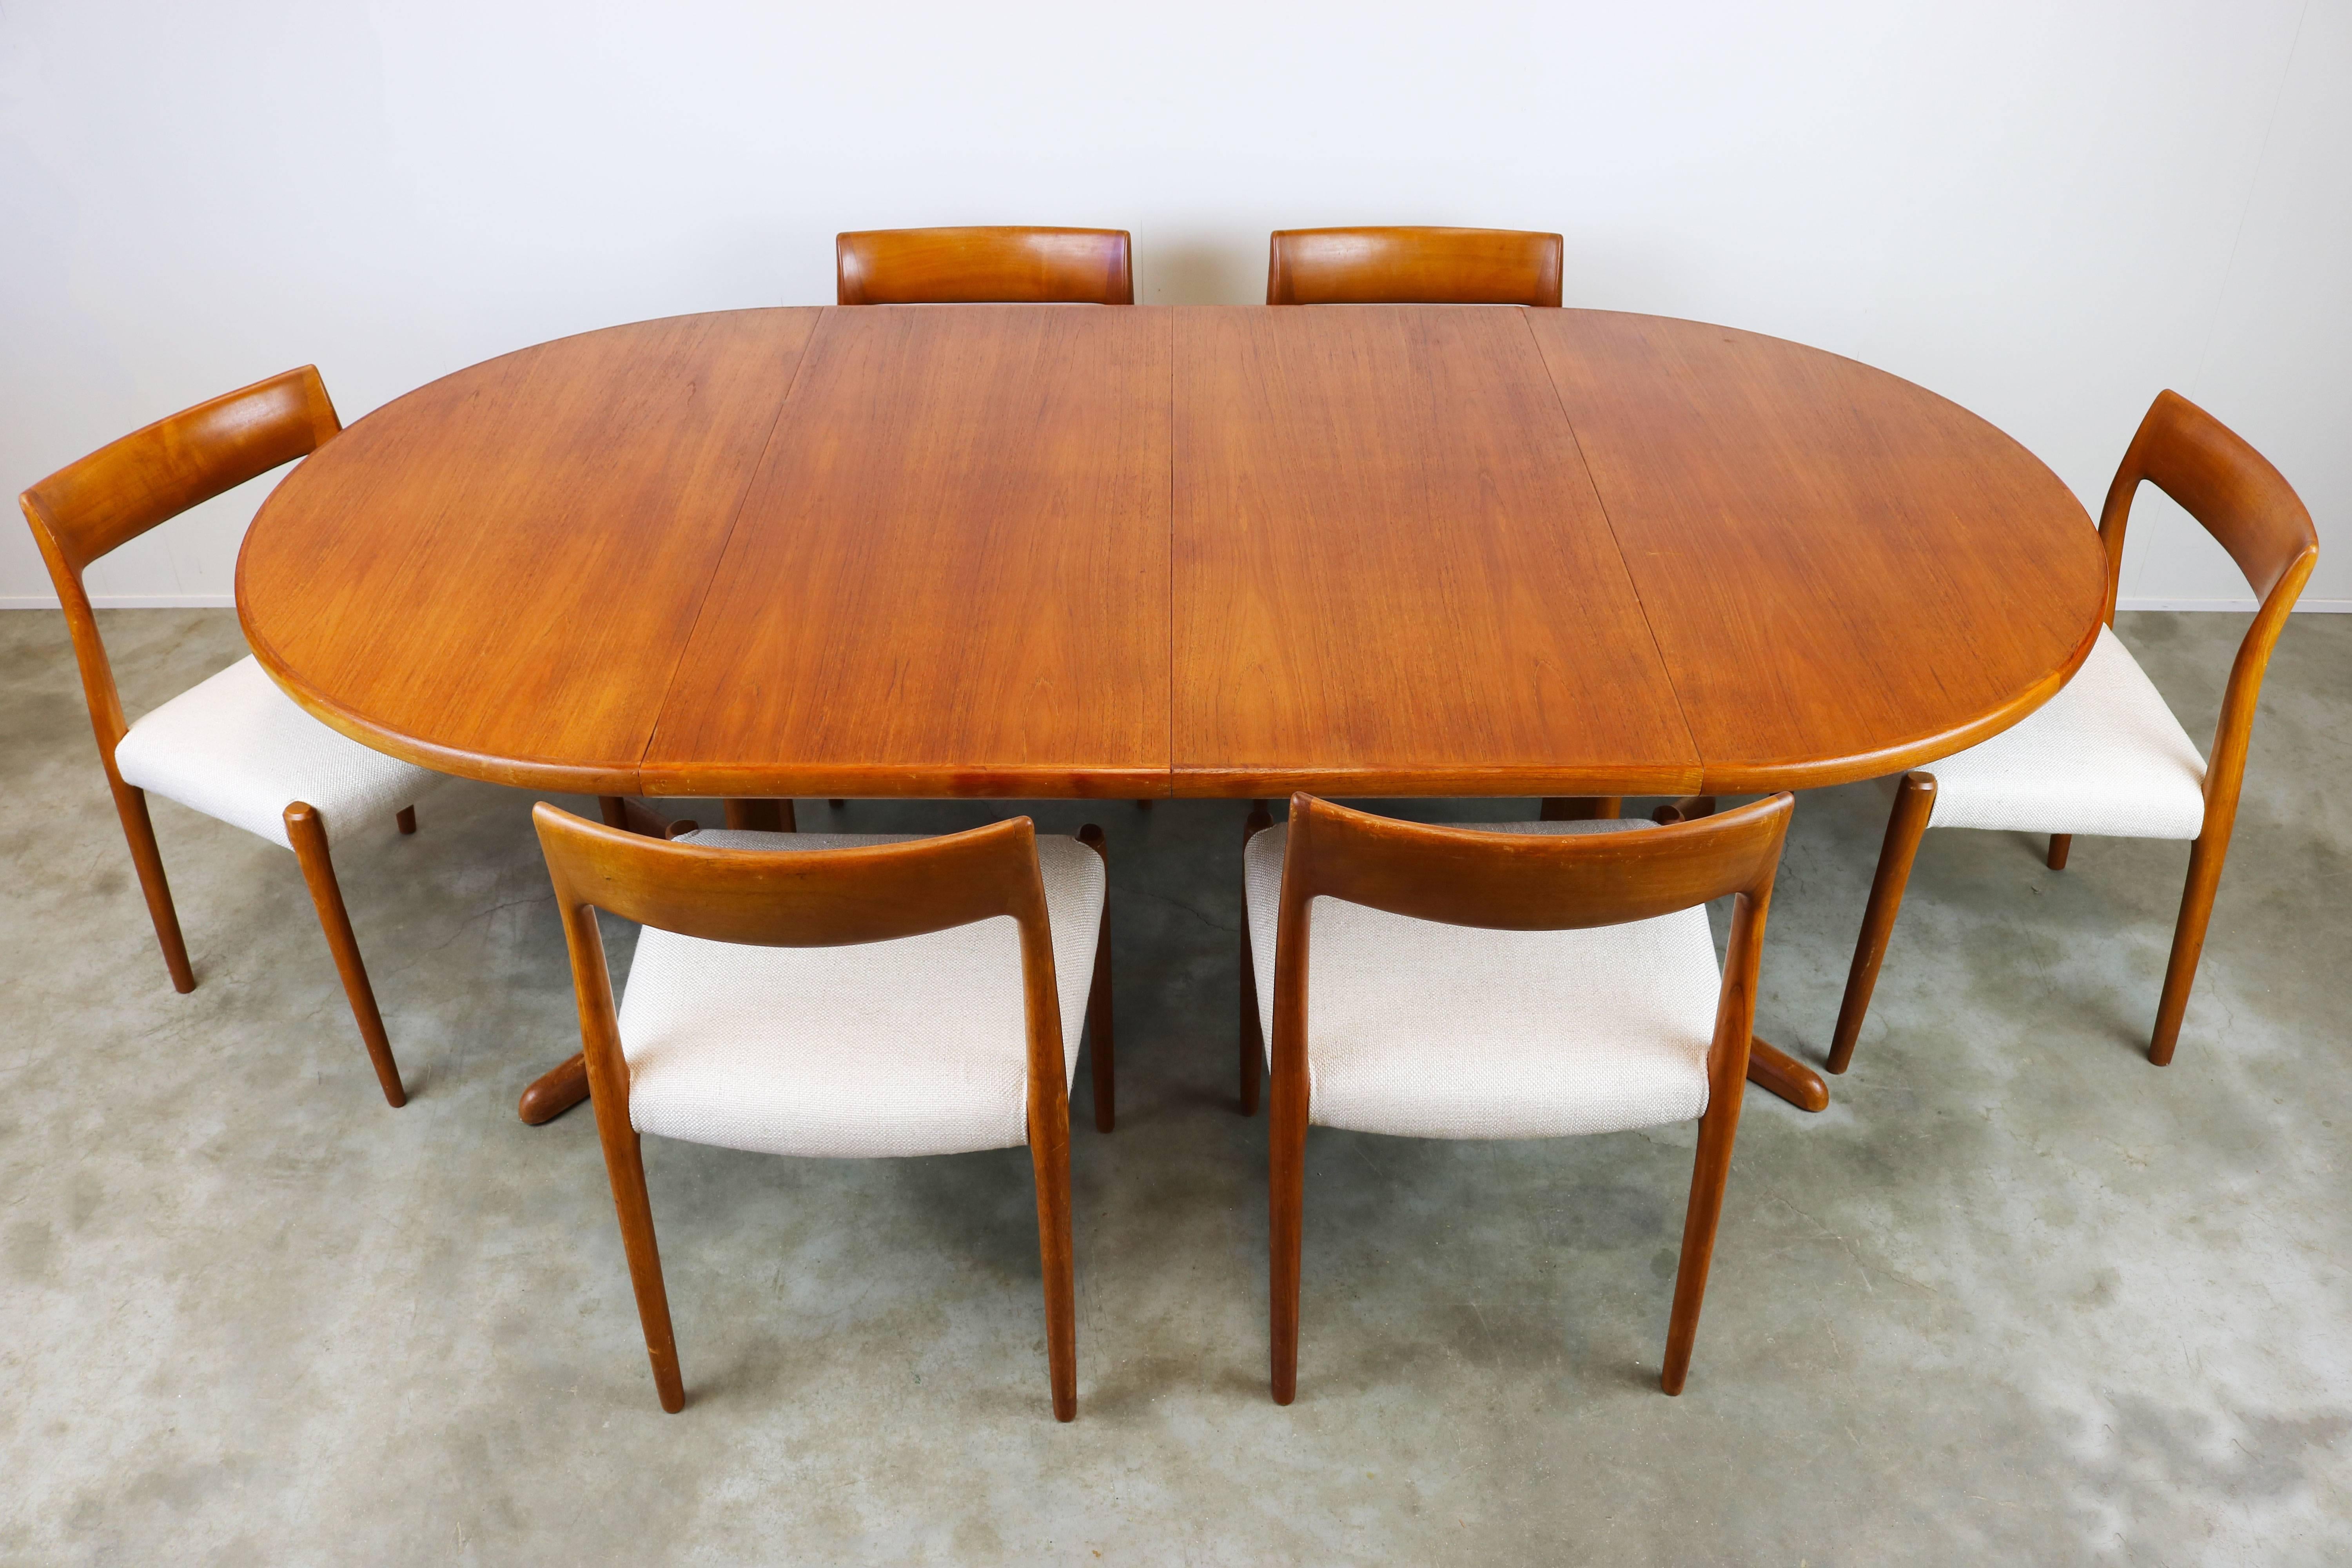 Large dining room set designed by Niels Otto Møller and produced by J.L Mollers in the 1950s. The set has six model 77 chairs in teak and a large round (twice extendable) table in teak.
The table can be used round for four persons. Extended once